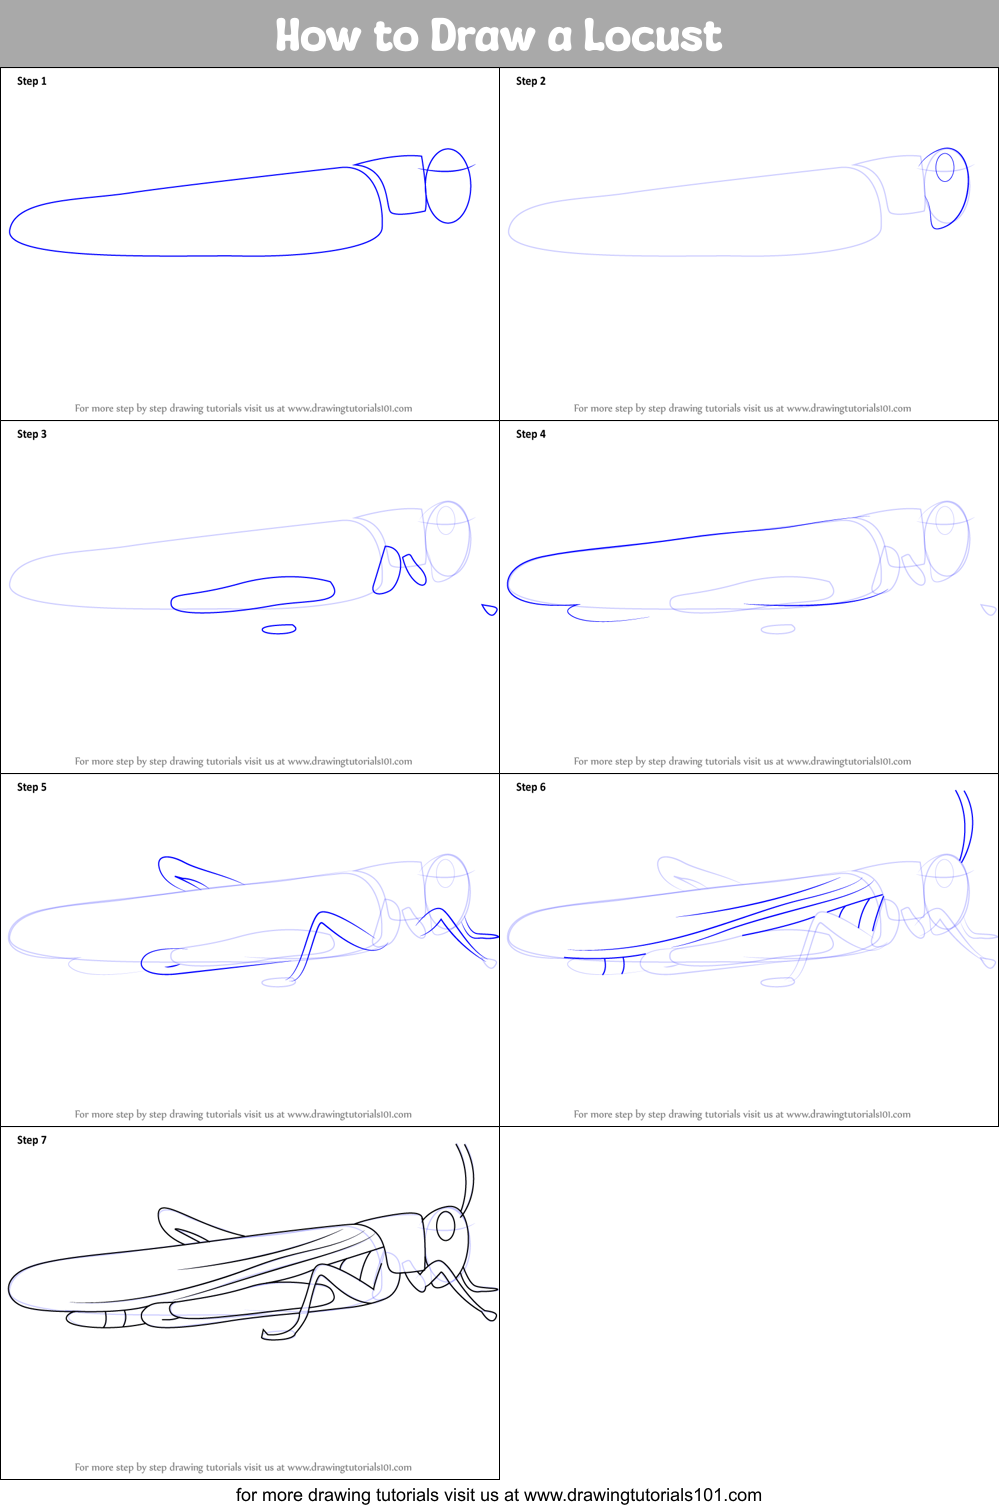 How to Draw a Locust printable step by step drawing sheet